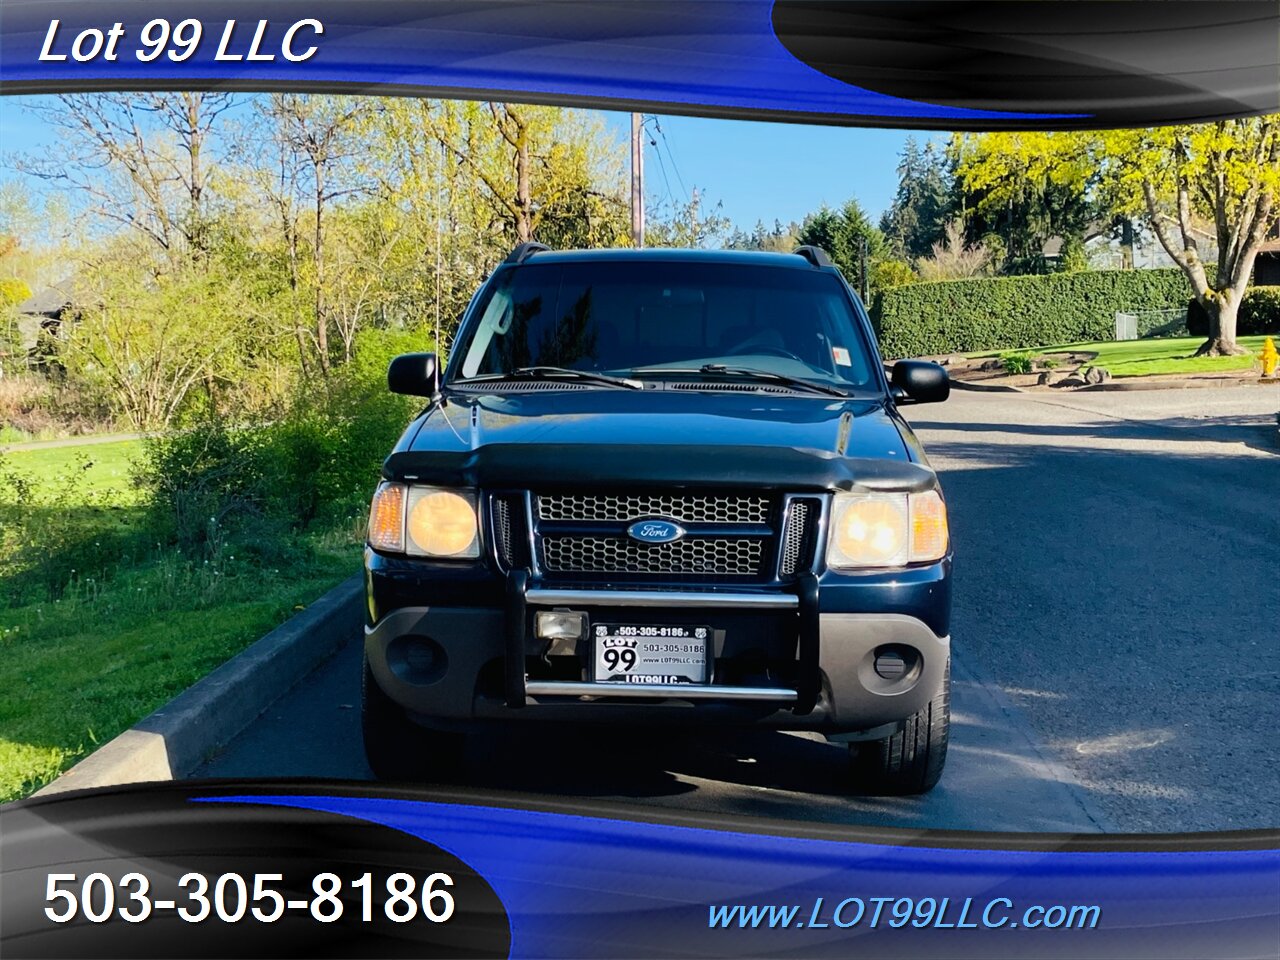 2003 Ford Explorer Sport Trac XLS 4x4  1-OWNER 117k  NEW TIRES  Canopy   - Photo 3 - Milwaukie, OR 97267